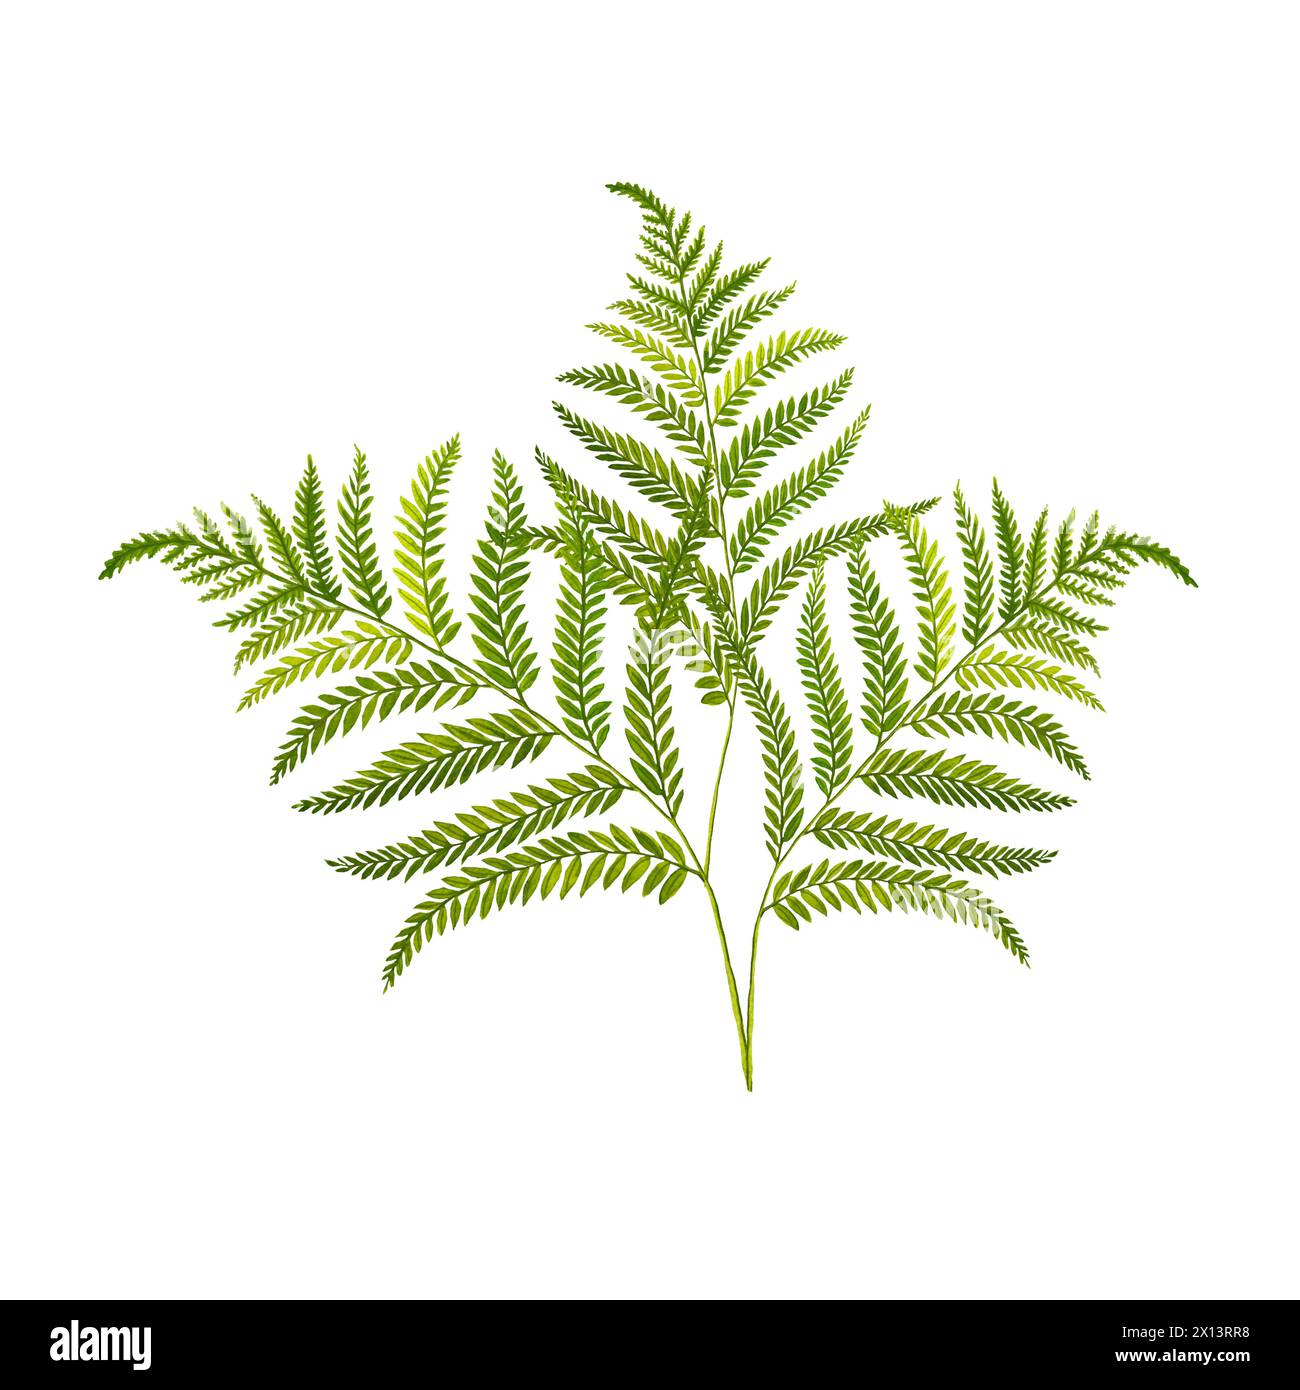 Watercolor fern leaves hand drawn illustration, isolated white background, flower clipart, for bouquets, wreaths, arrangements, wedding invitations Stock Photo